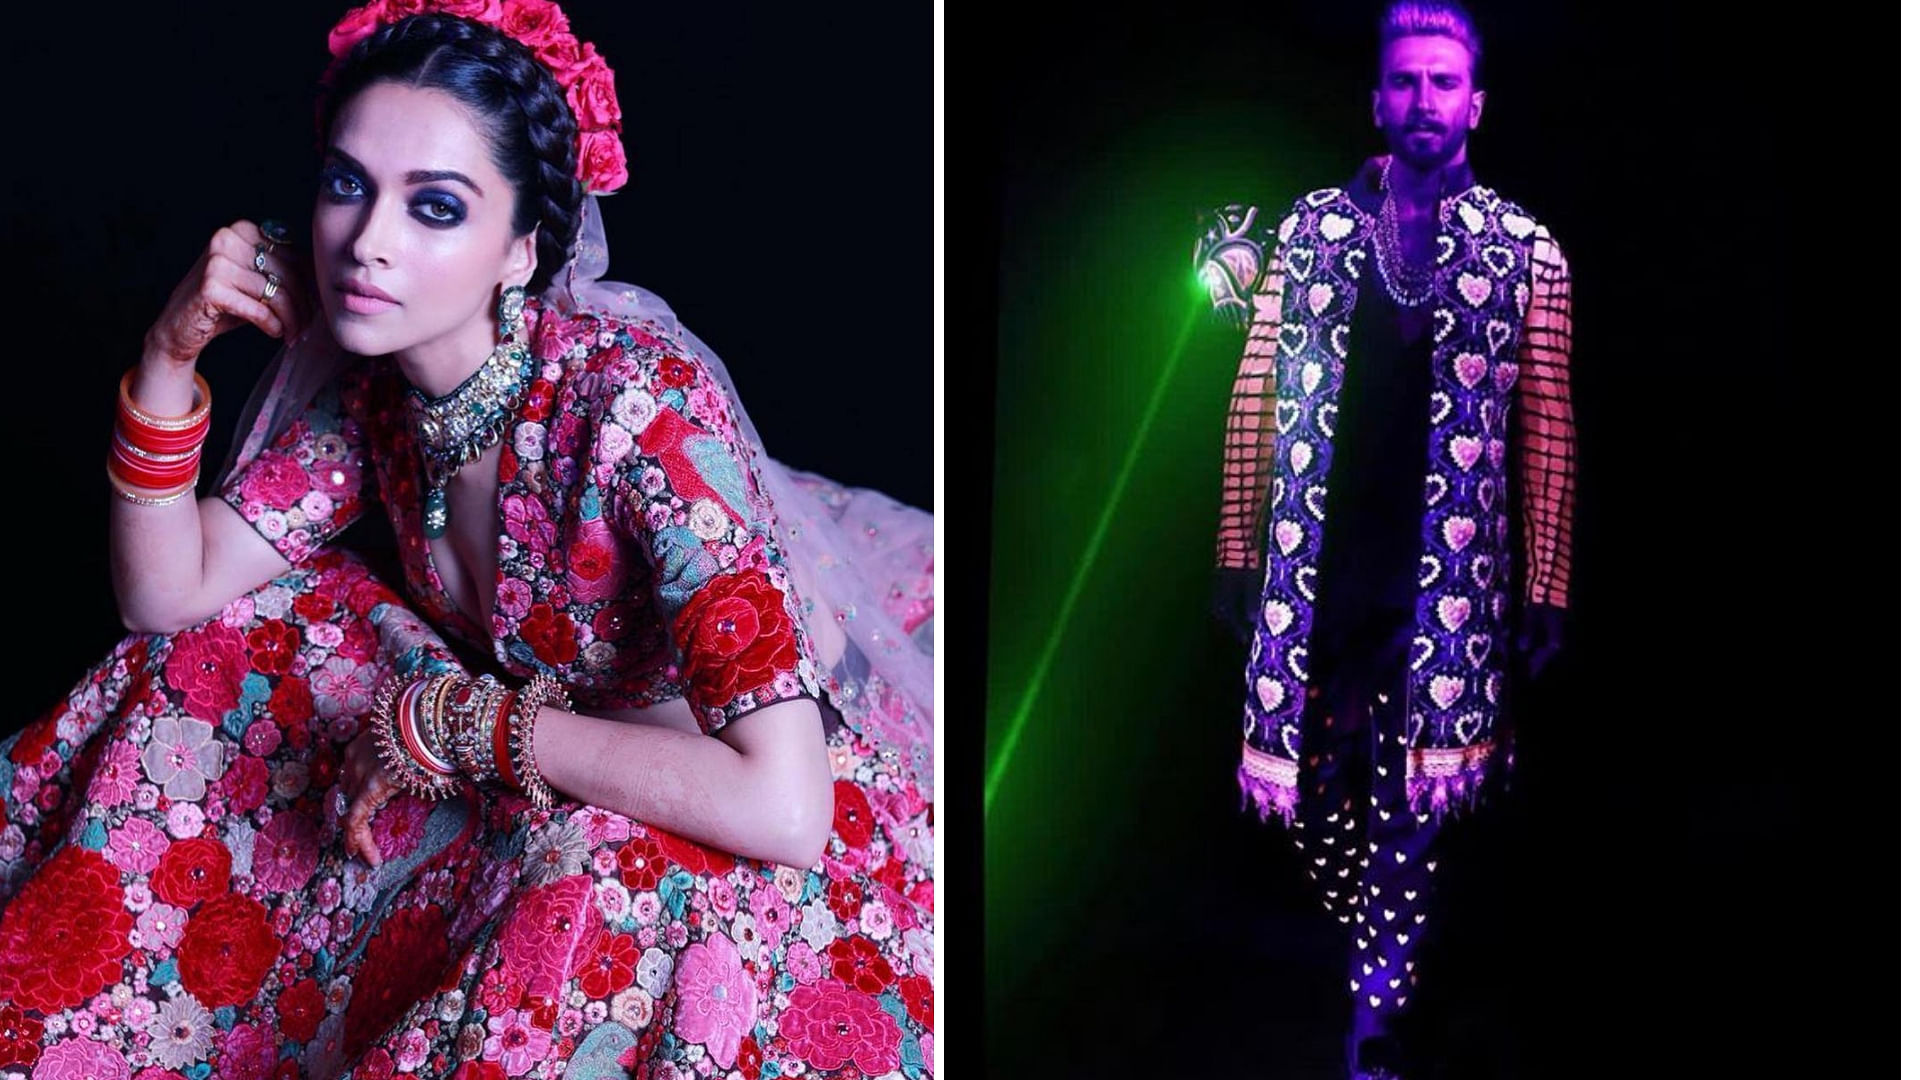 Deepika and Ranveer went for dramatic looks for the first party in Mumbai.